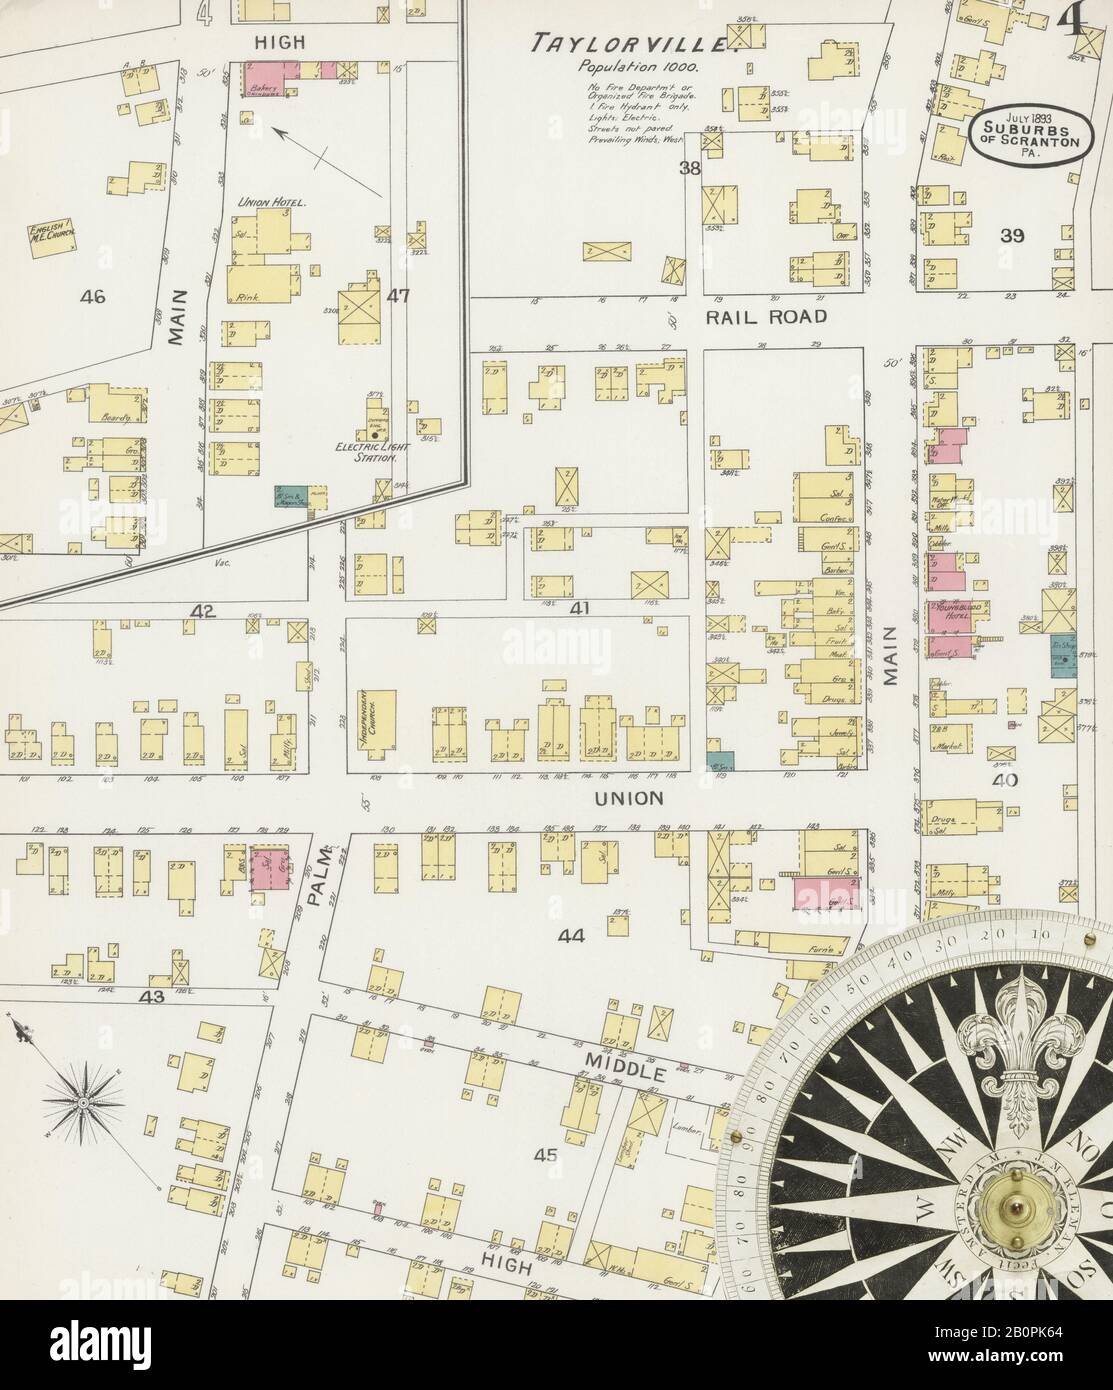 Image 4 of Sanborn Fire Insurance Map from Scranton Suburbs, Lackawanna County, Pennsylvania. Jul 1893. 5 Sheet(s). Includes Archbald, Dalton, Moosic, Moscow, Peckville, Taylorville, Waverly, America, street map with a Nineteenth Century compass Stock Photo